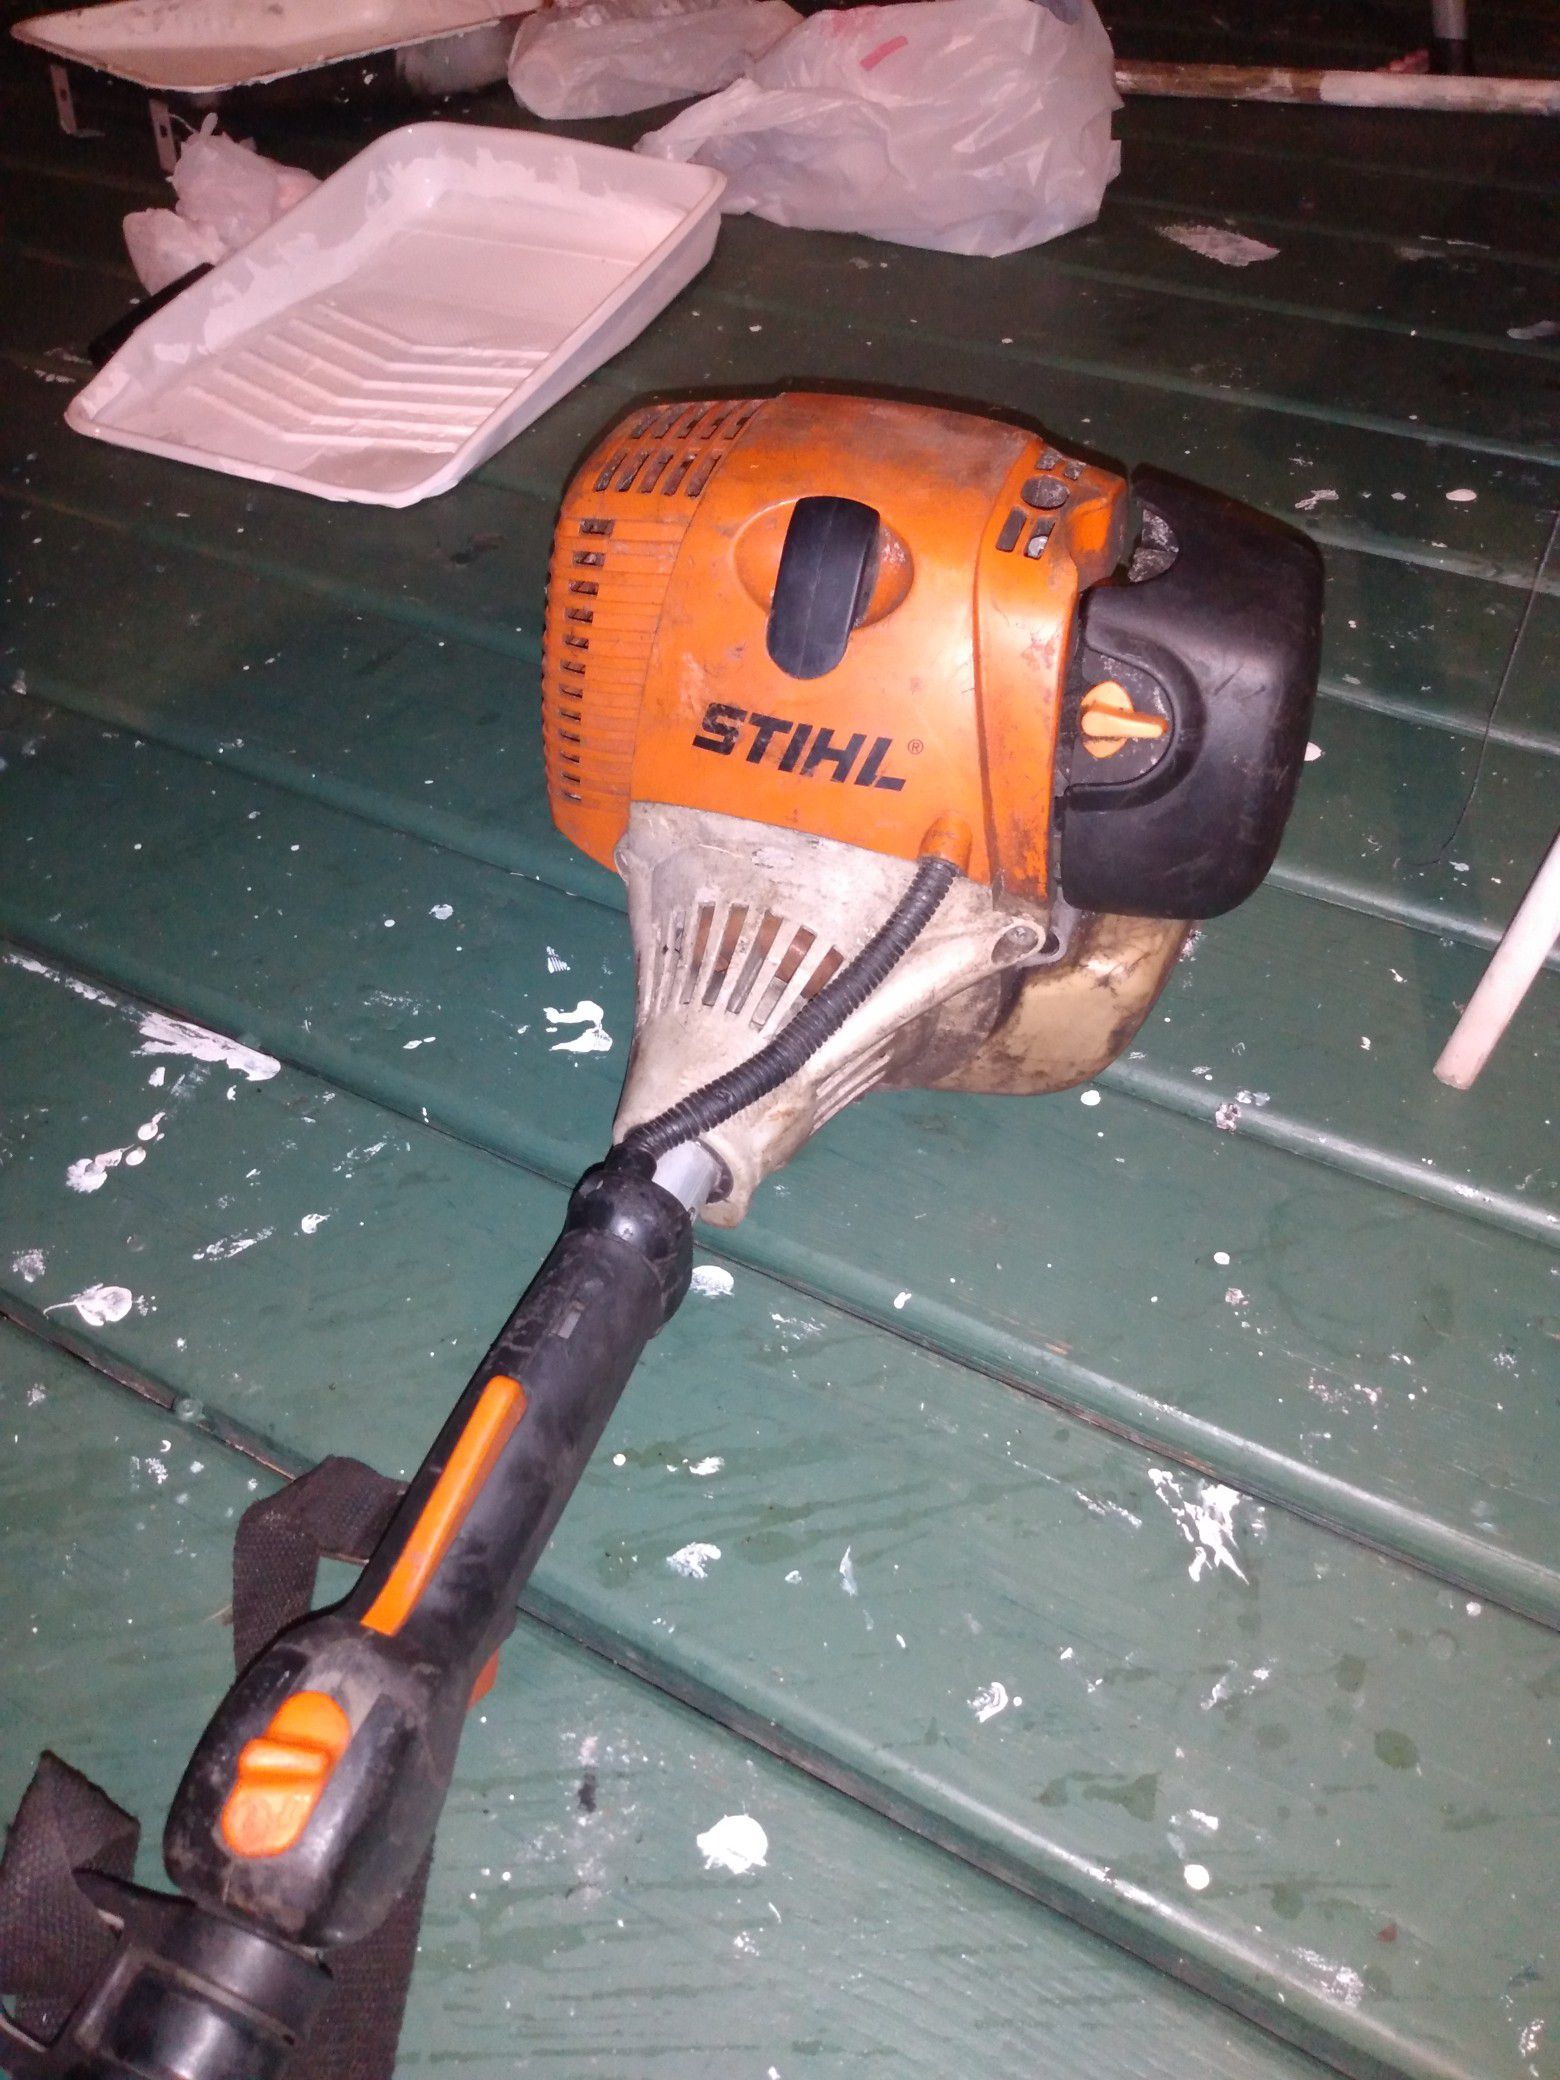 Stihl pole saw, fires up 1st or 2nd pull